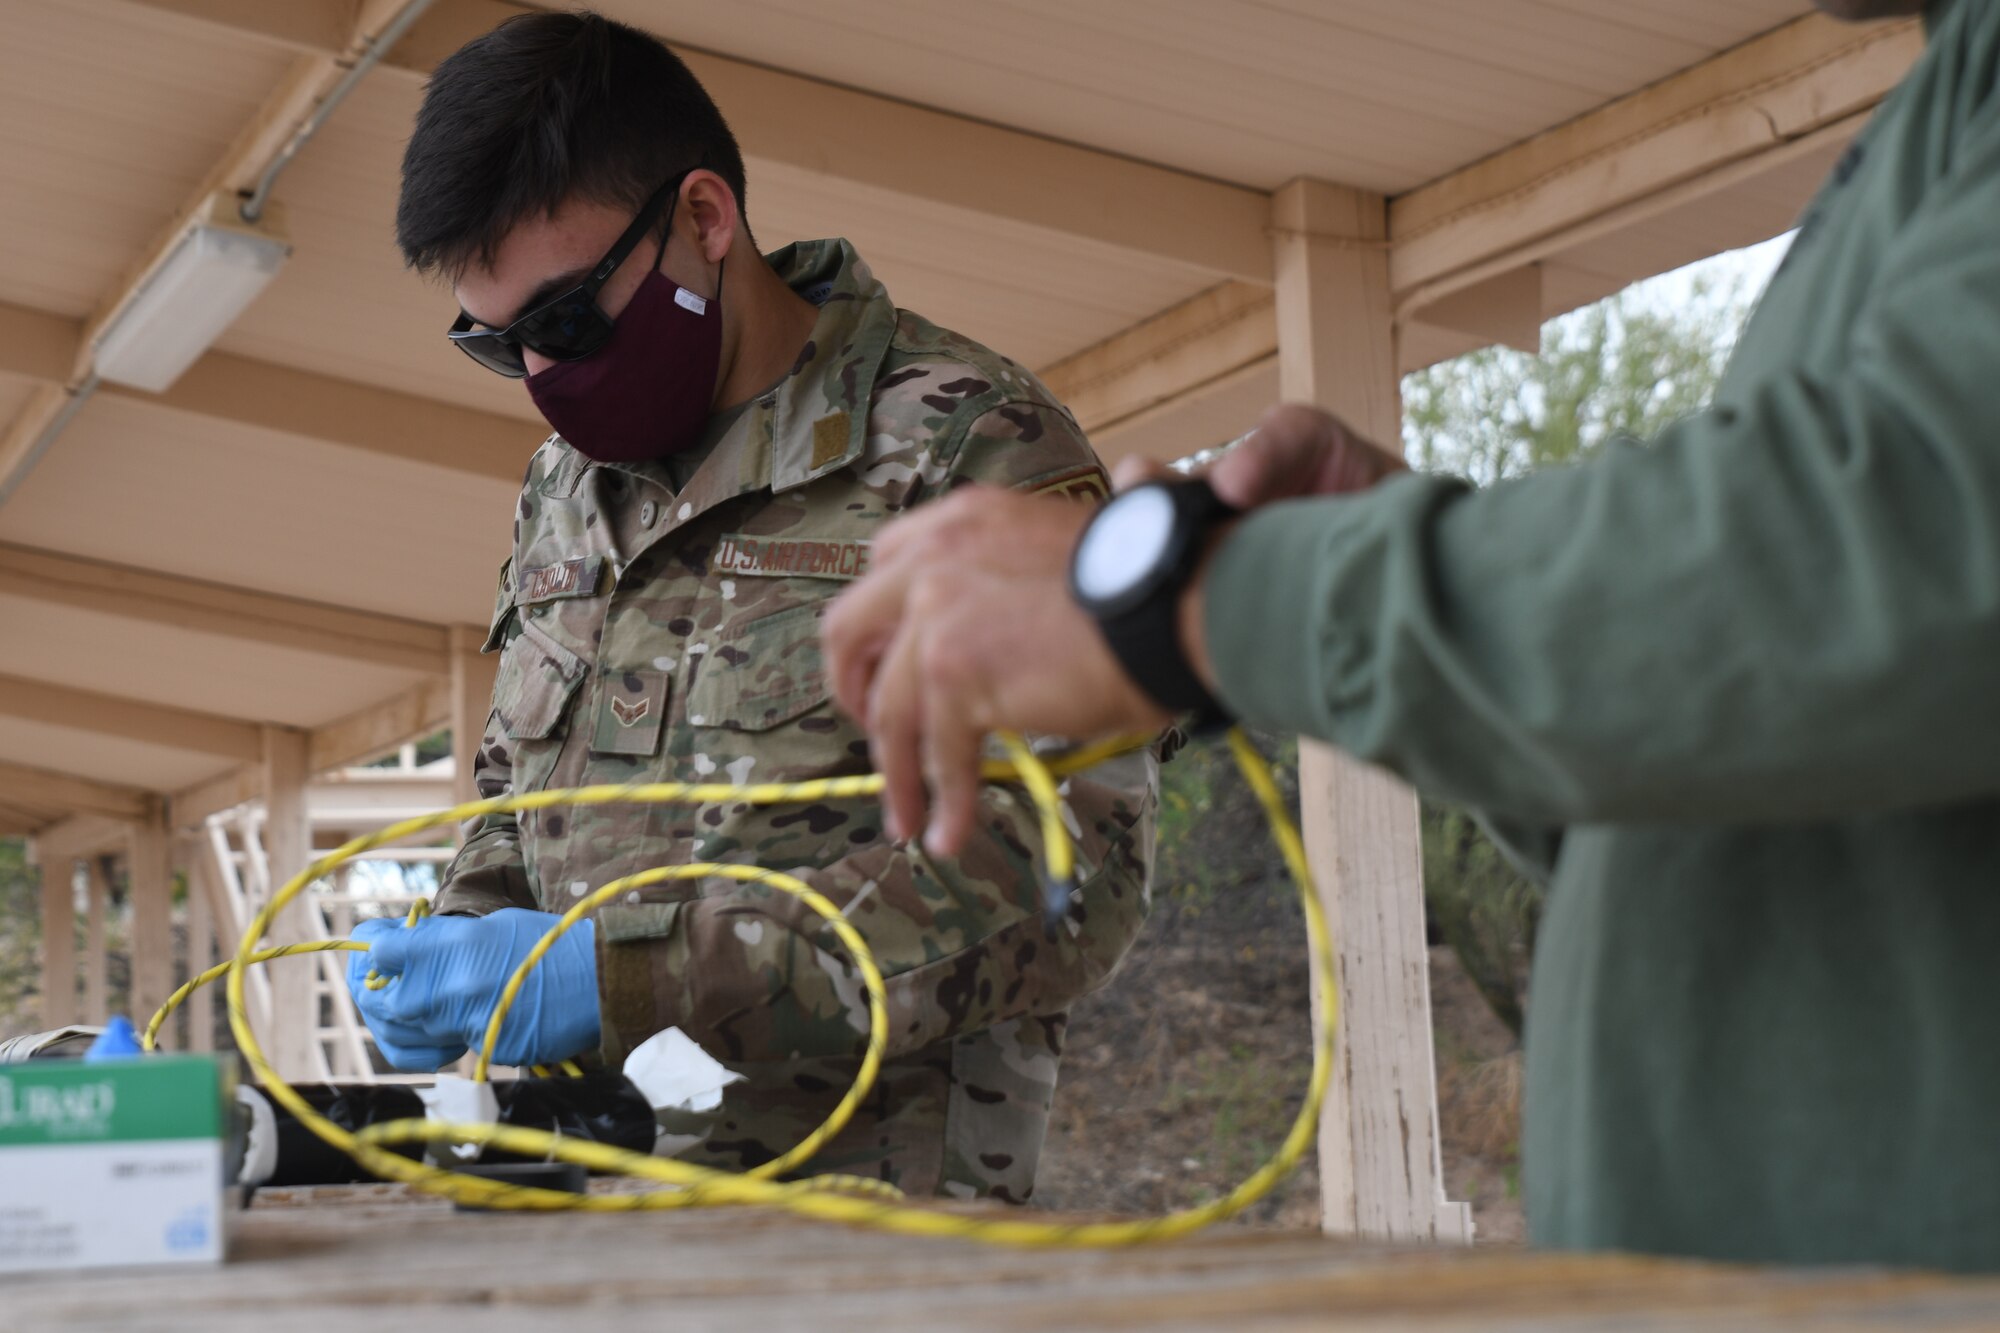 An Airman learning to prepare explosives for demolition training